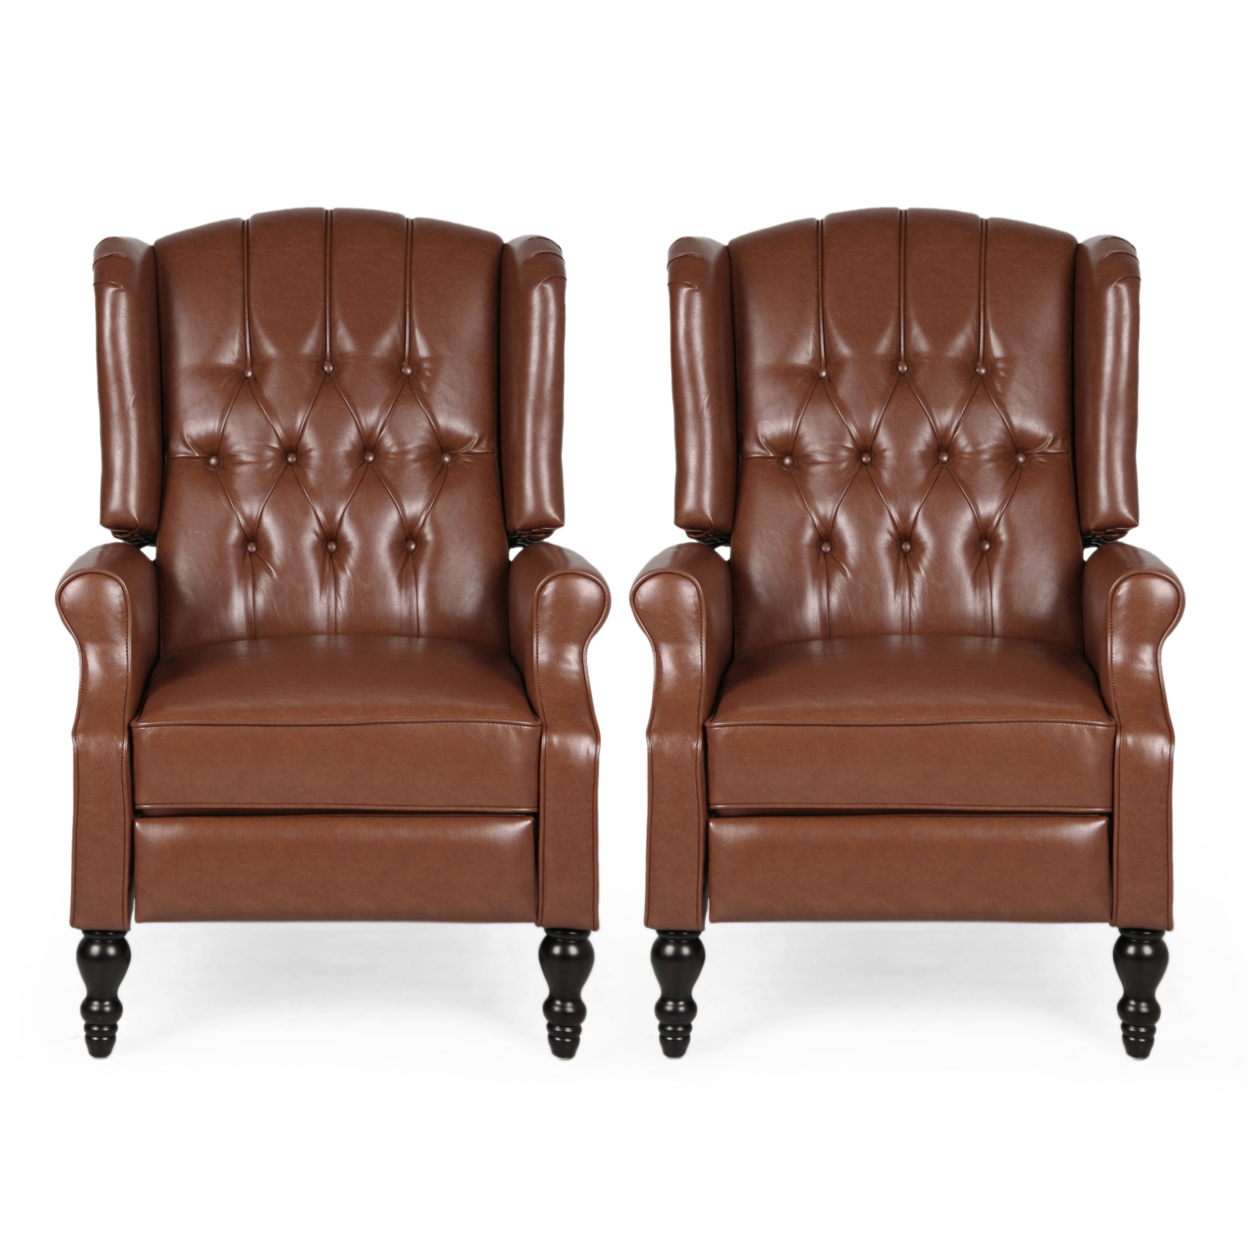 Temzyl Contemporary Tufted Recliners (Set Of 2)